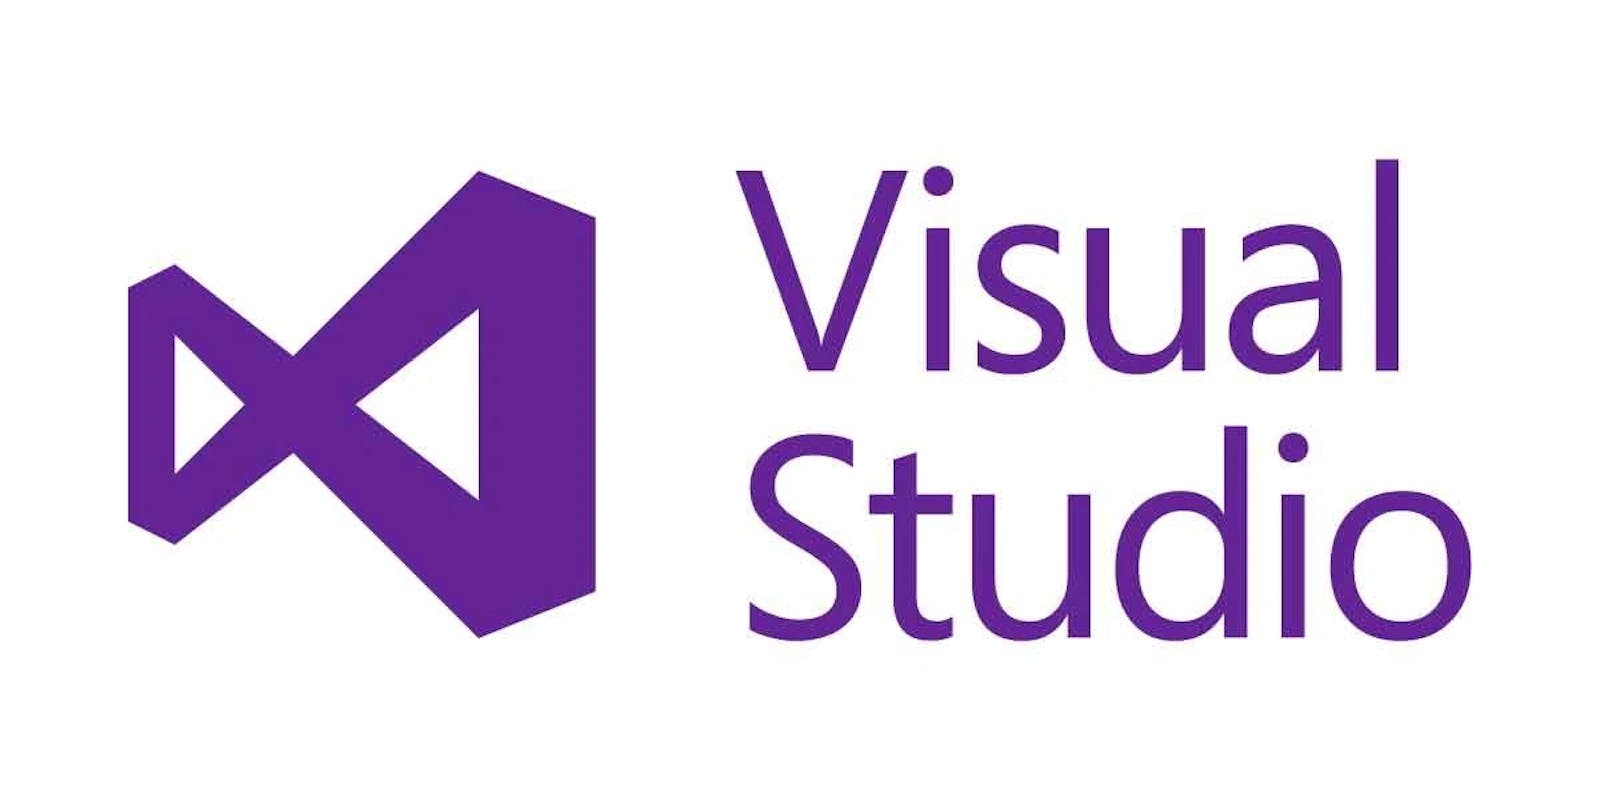 How to install Visual Studio Code on Linux Mint 21 vanessa or any other Ubuntu-based Linux distribution with a Debian file format